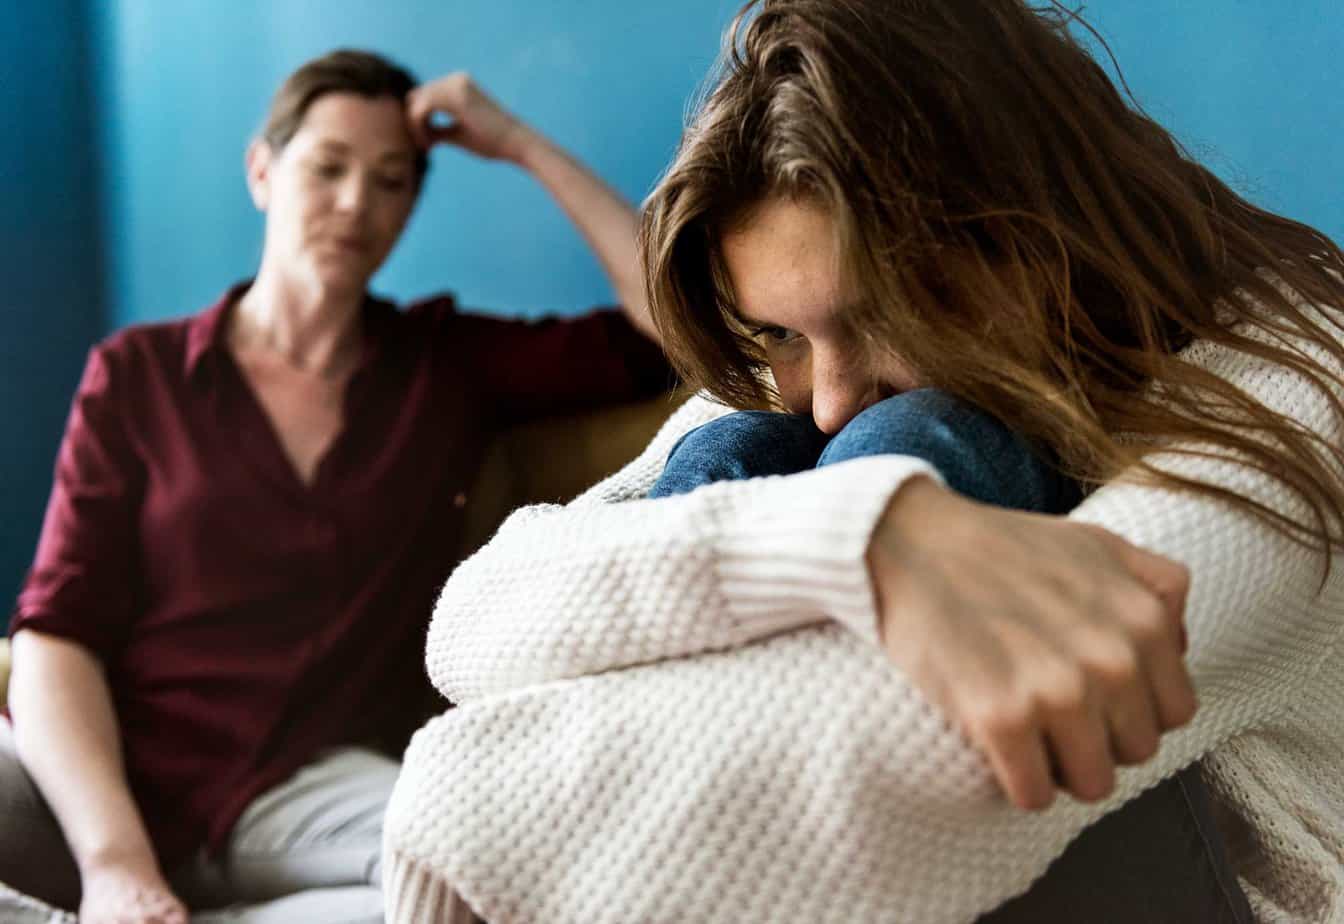 What to Do When Your Loved One Relapses